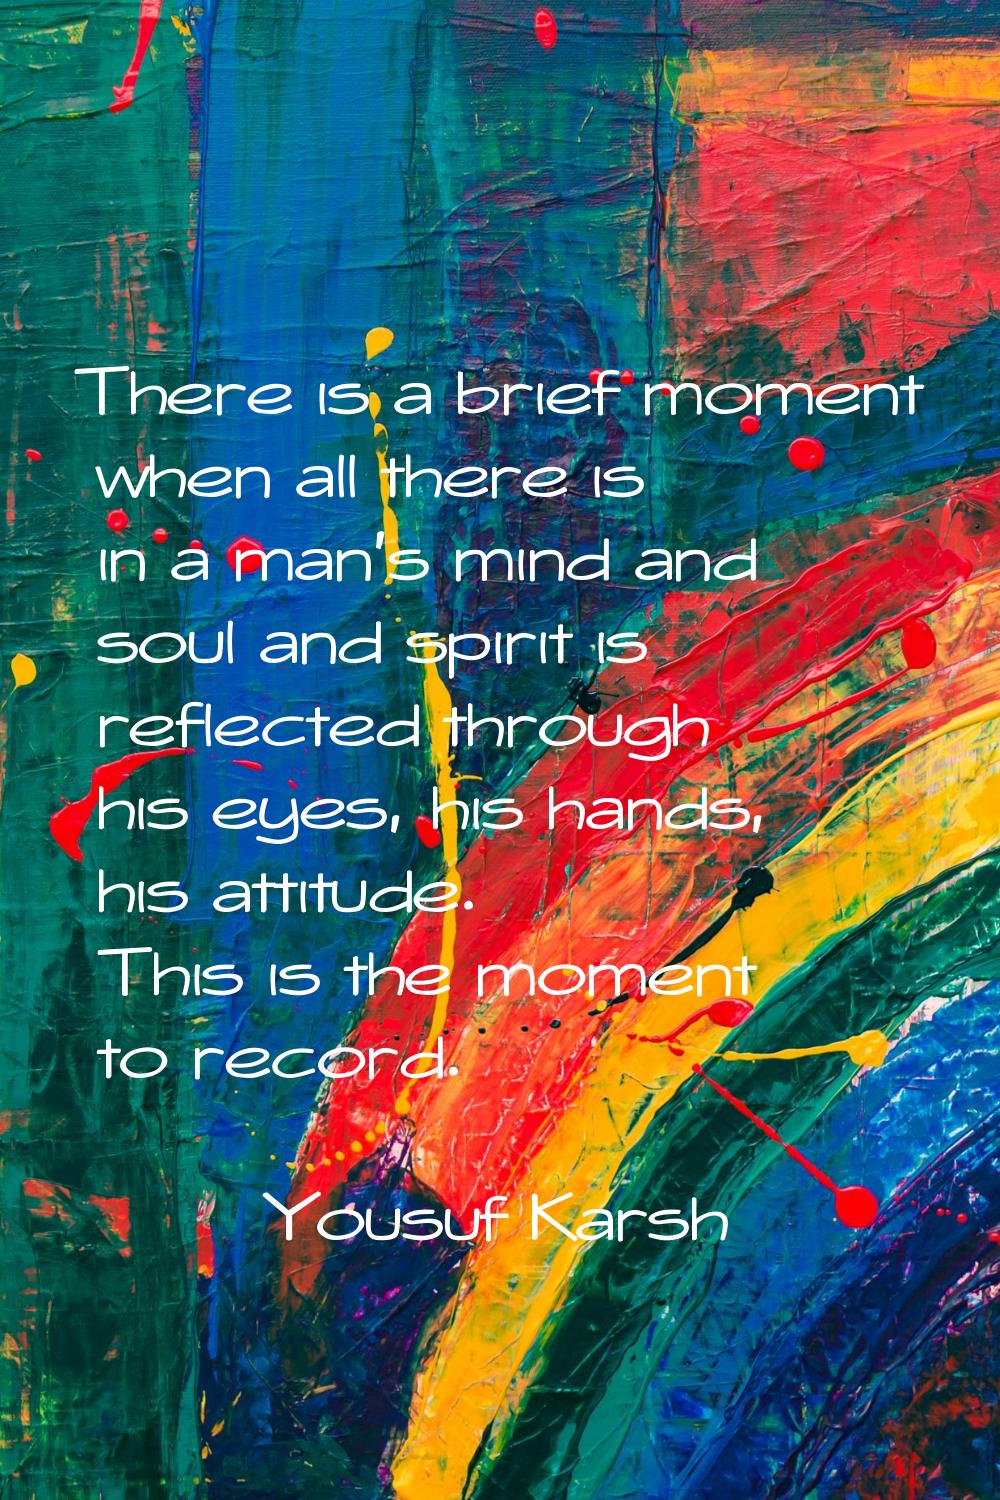 There is a brief moment when all there is in a man's mind and soul and spirit is reflected through 